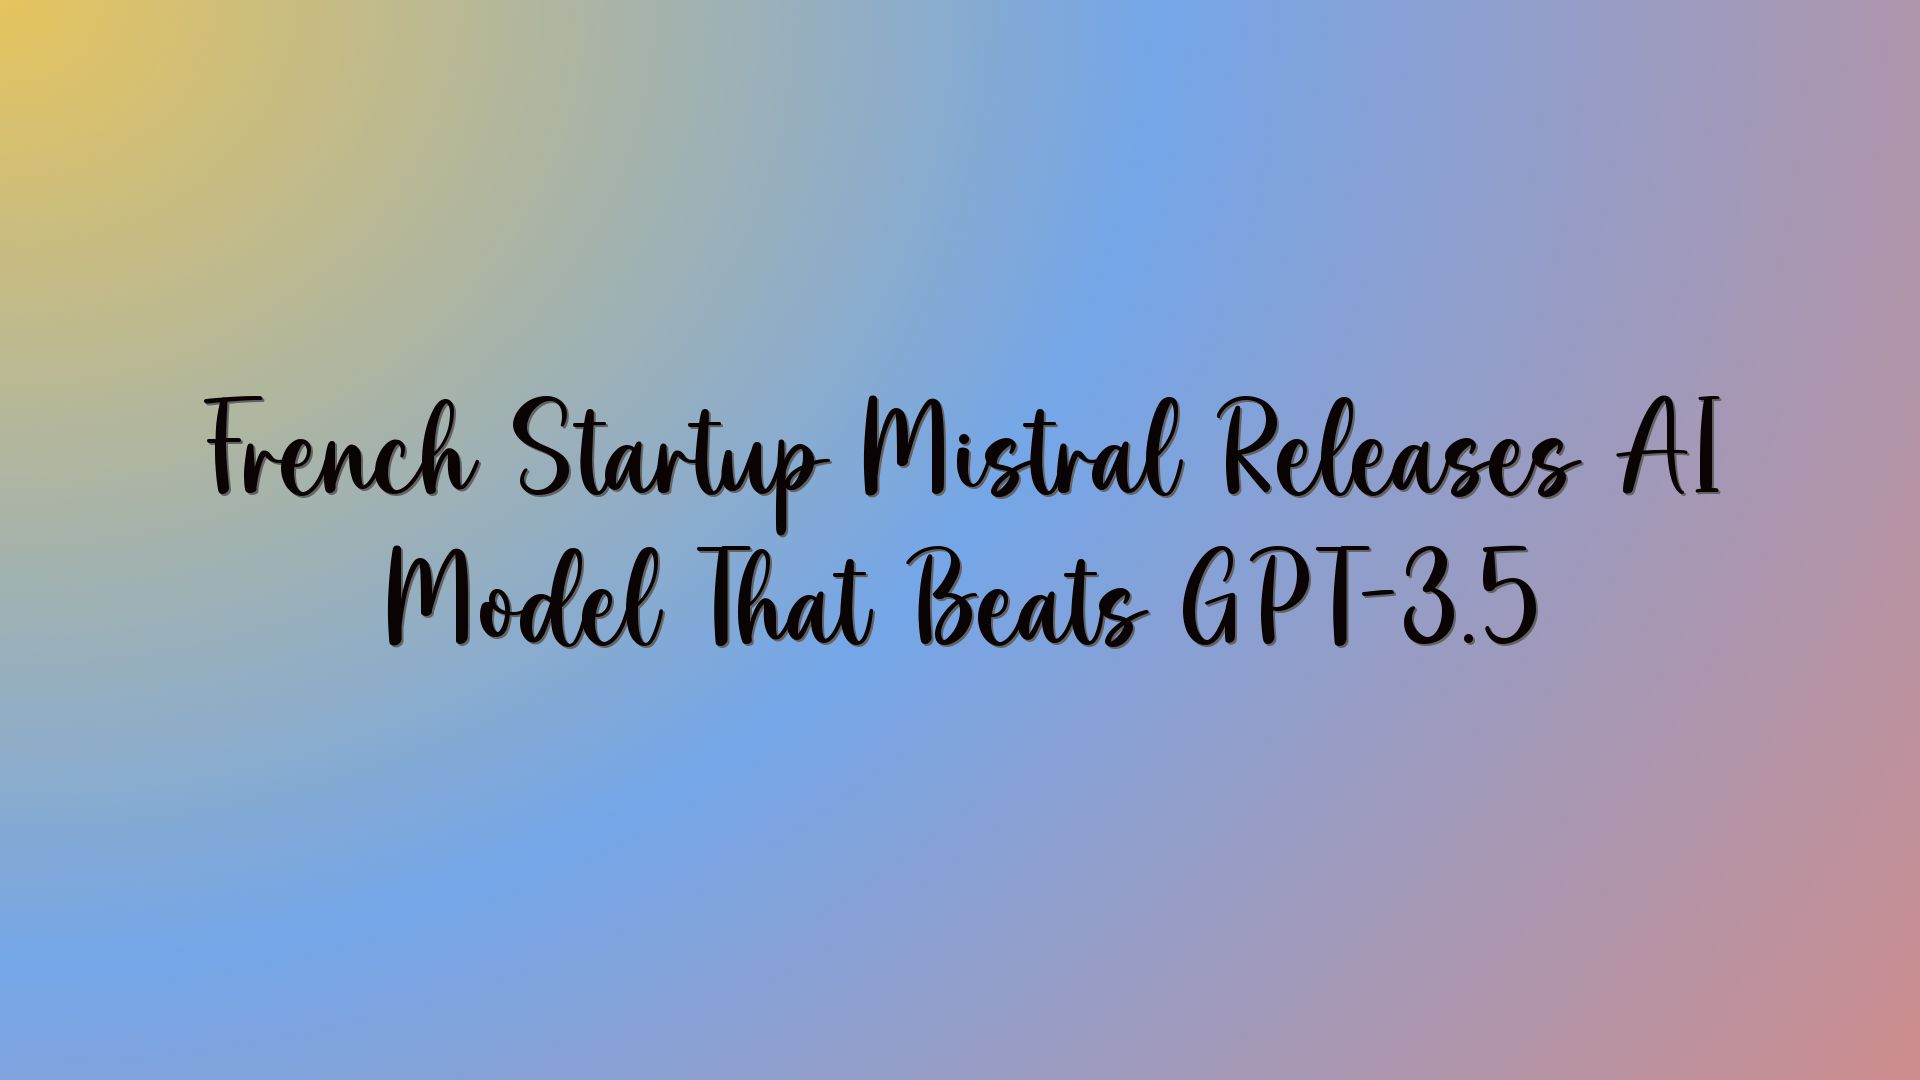 French Startup Mistral Releases AI Model That Beats GPT-3.5